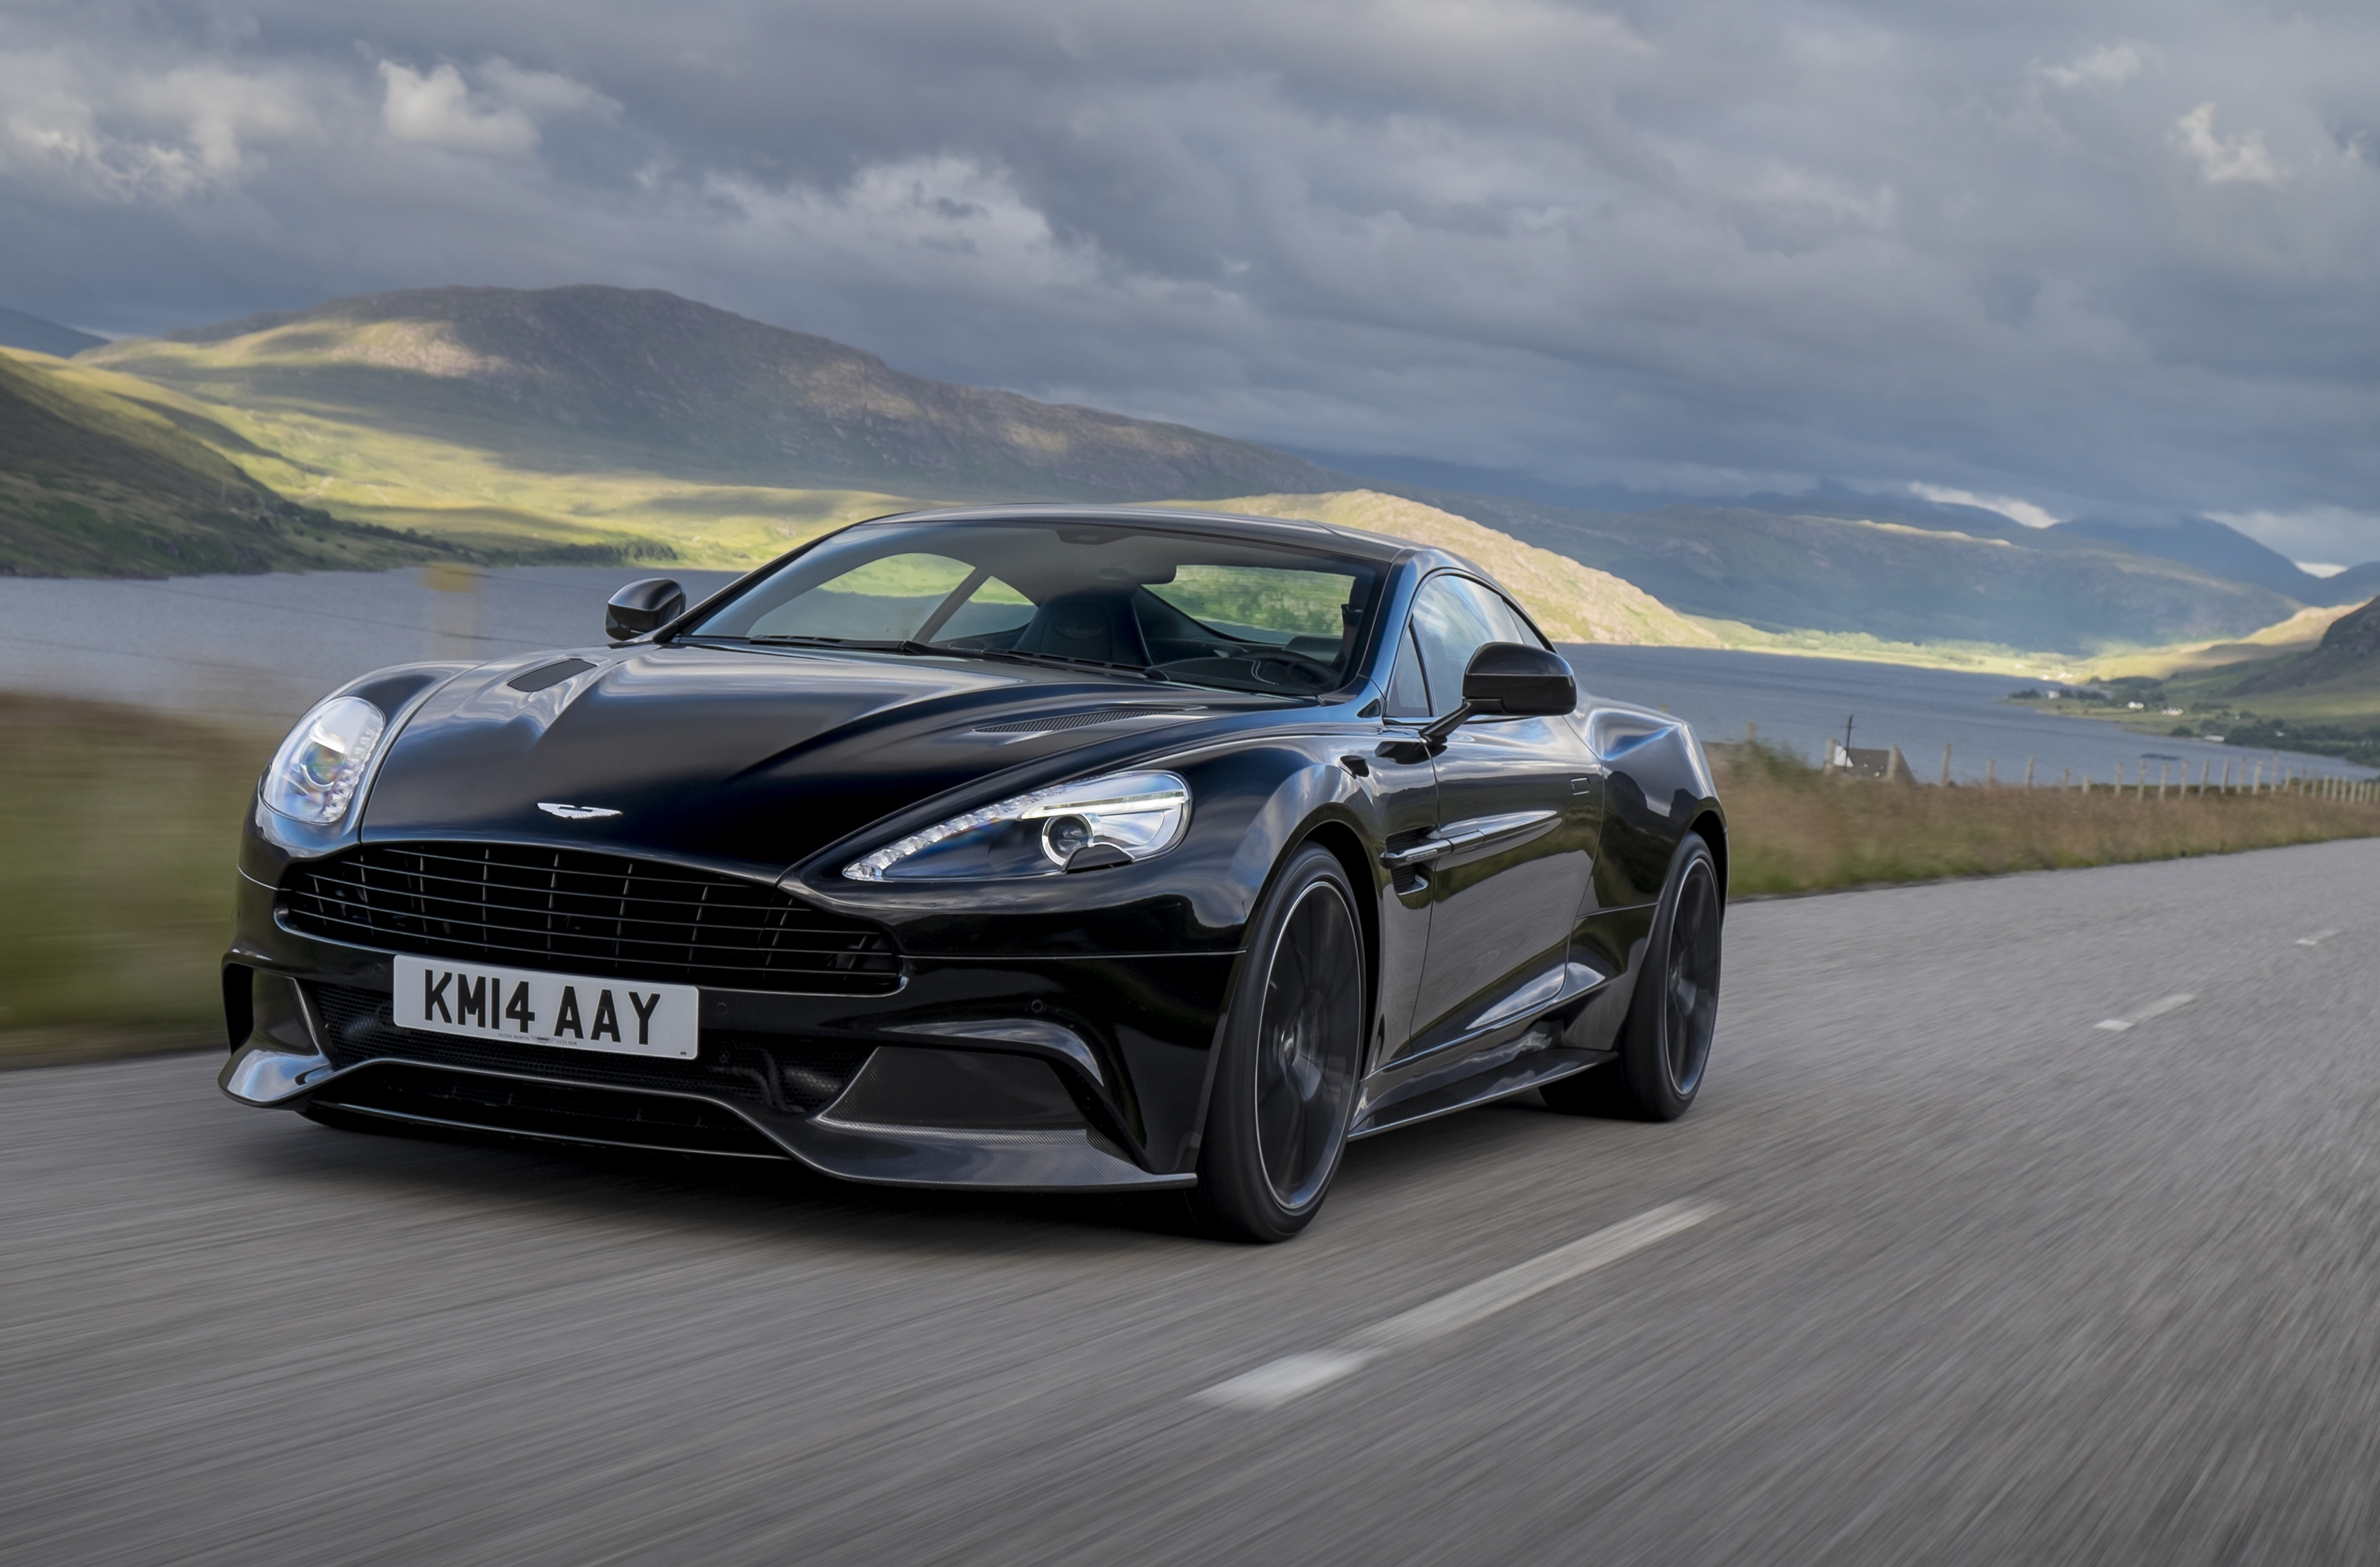 Aston Martin Vanquish review and pictures | evo